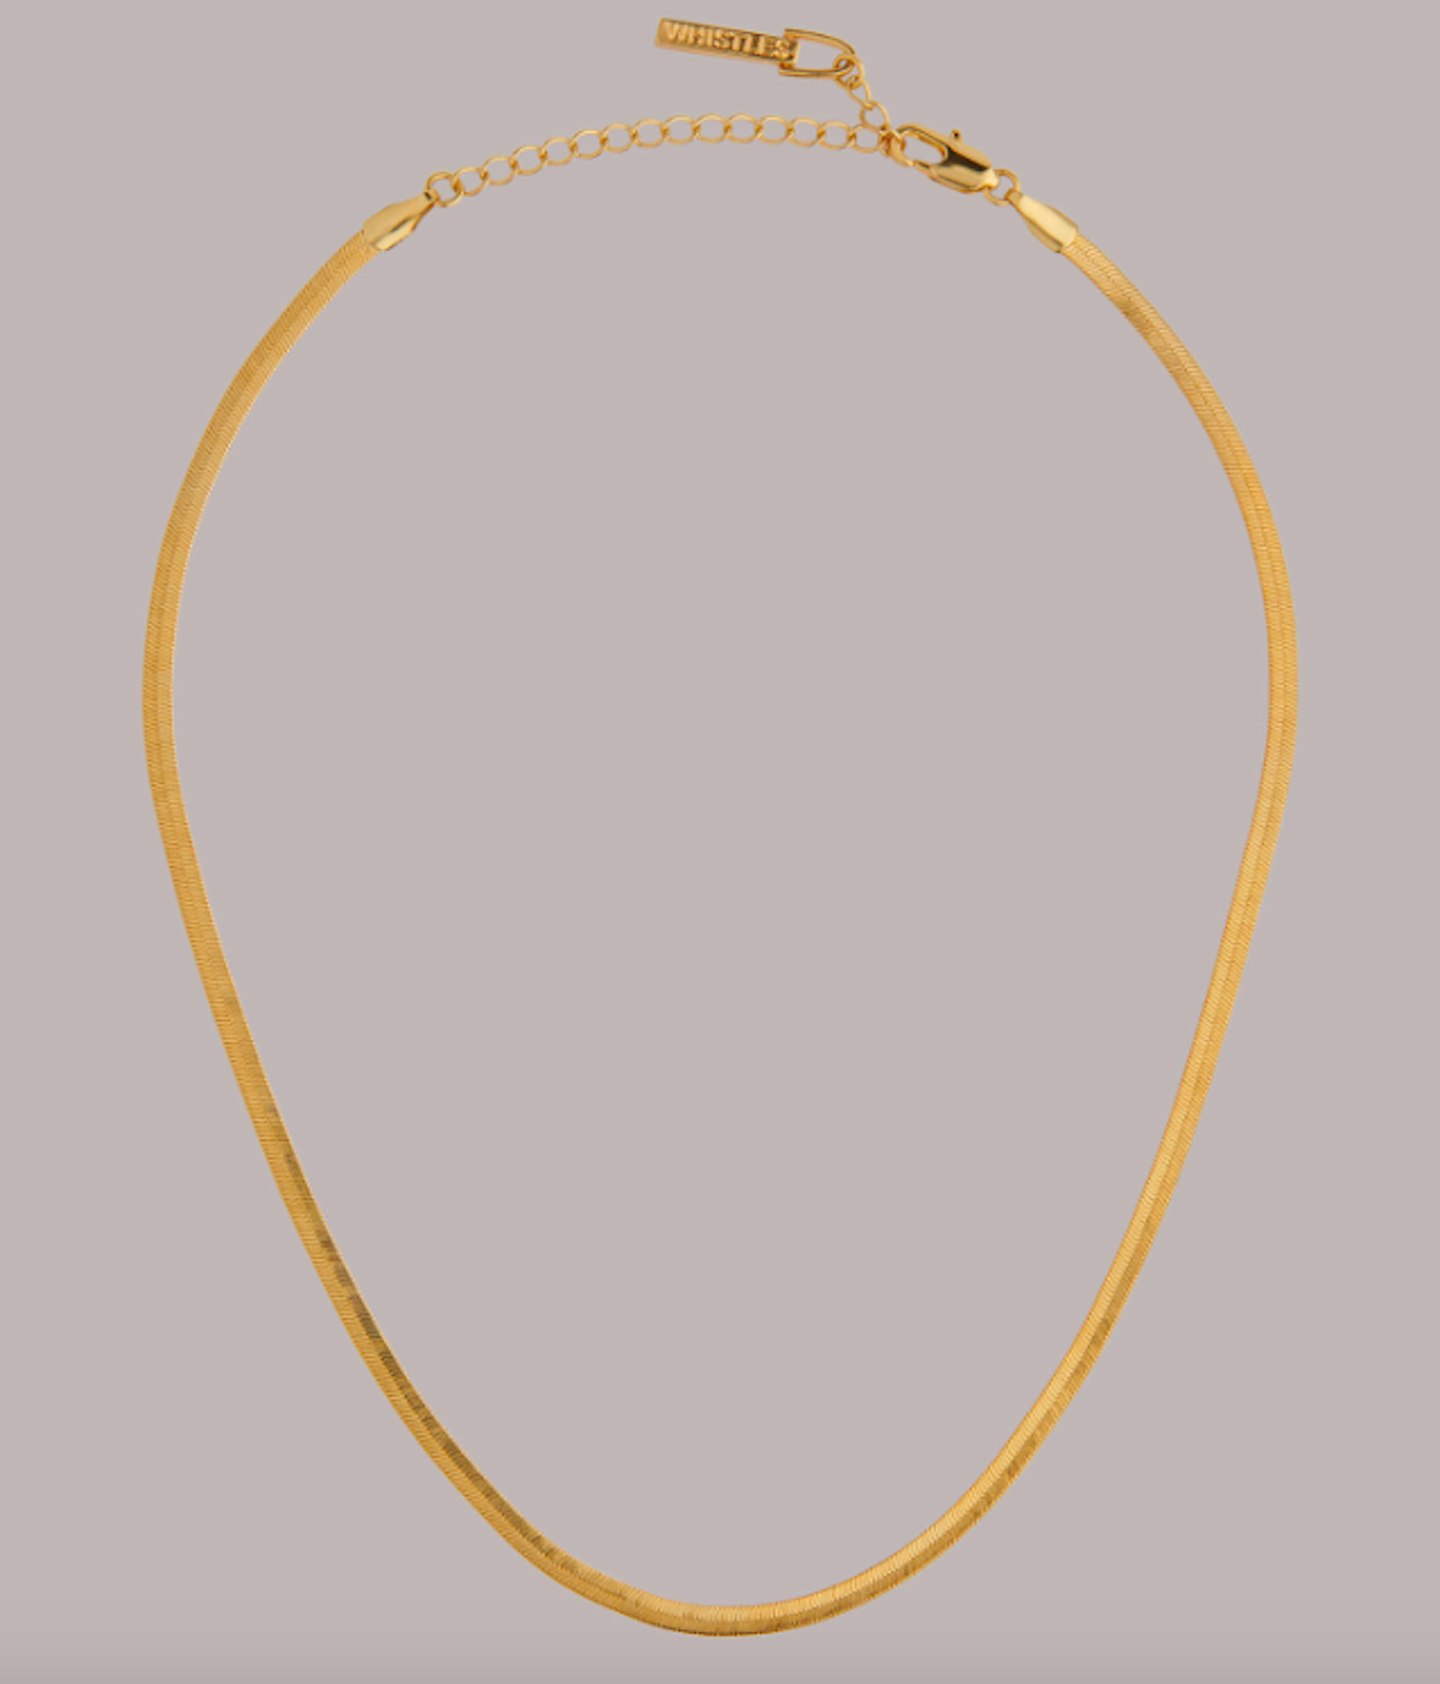 Whistles, Flat Snake Chain Necklace, £25